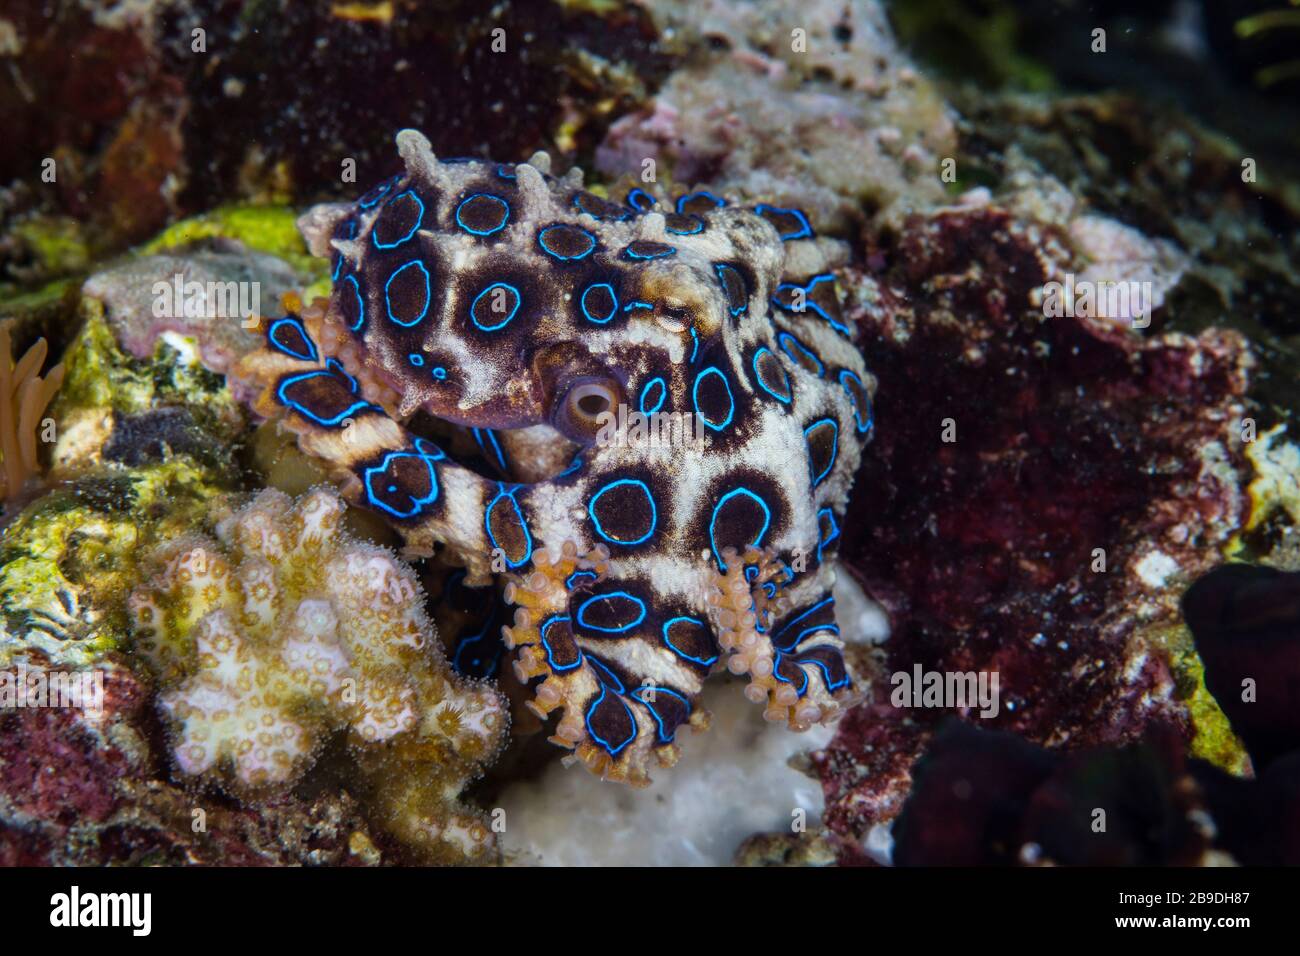 A greater blue-ring octopus, Hapalochlaena lunulata, crawls across a coral reef. Stock Photo